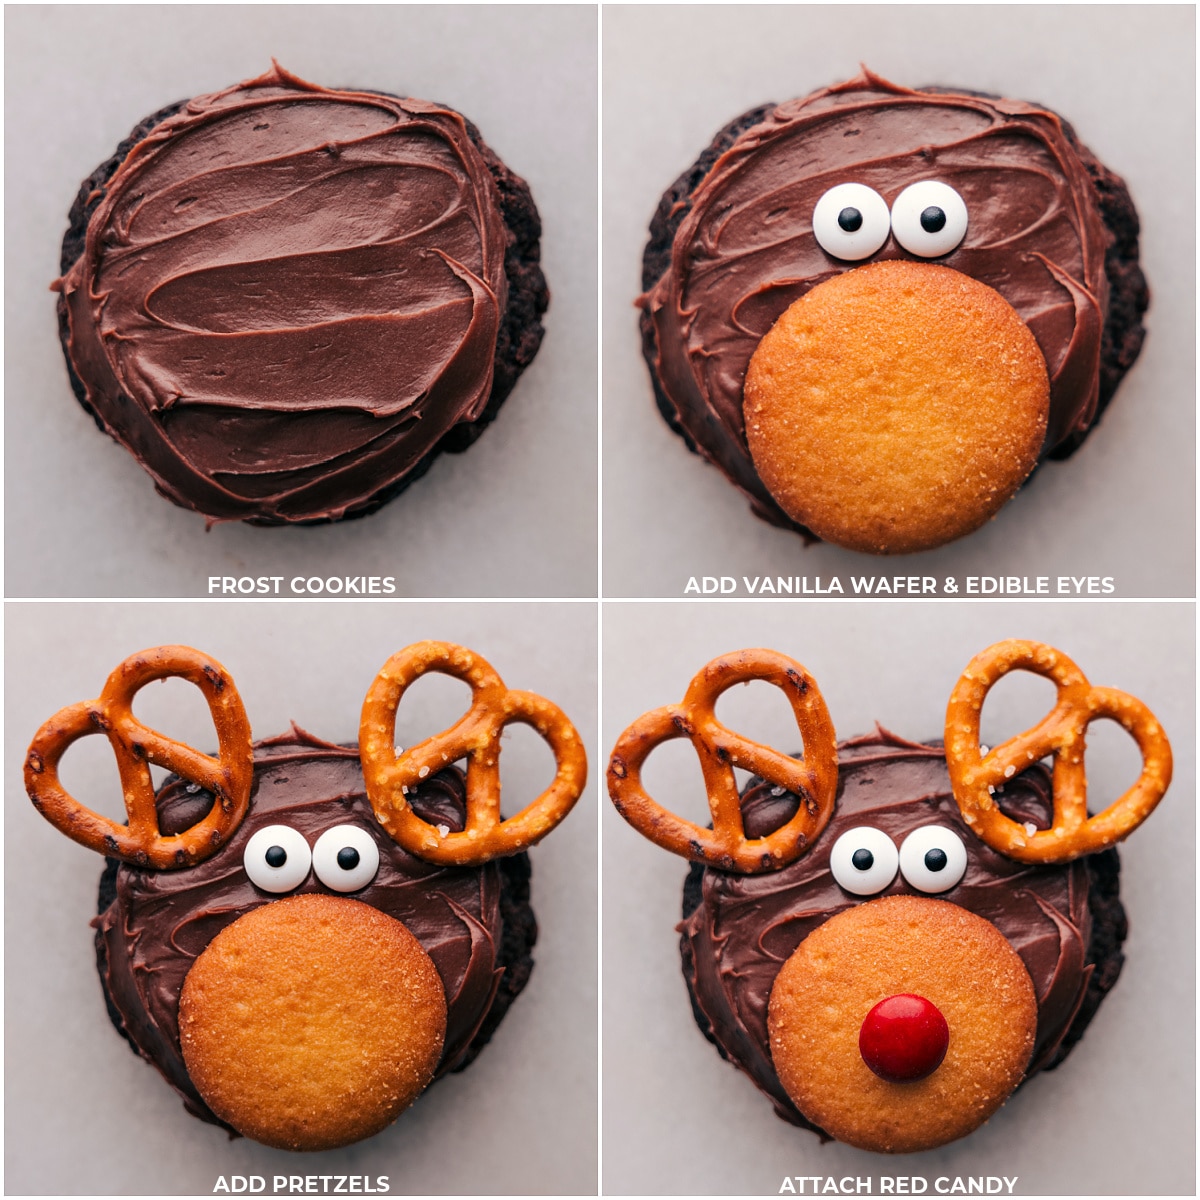 Decorating a cookie to resemble a reindeer: beginning with frosting, adding candy eyes and a wafer, placing pretzels as antlers, and finishing with a red candy nose.